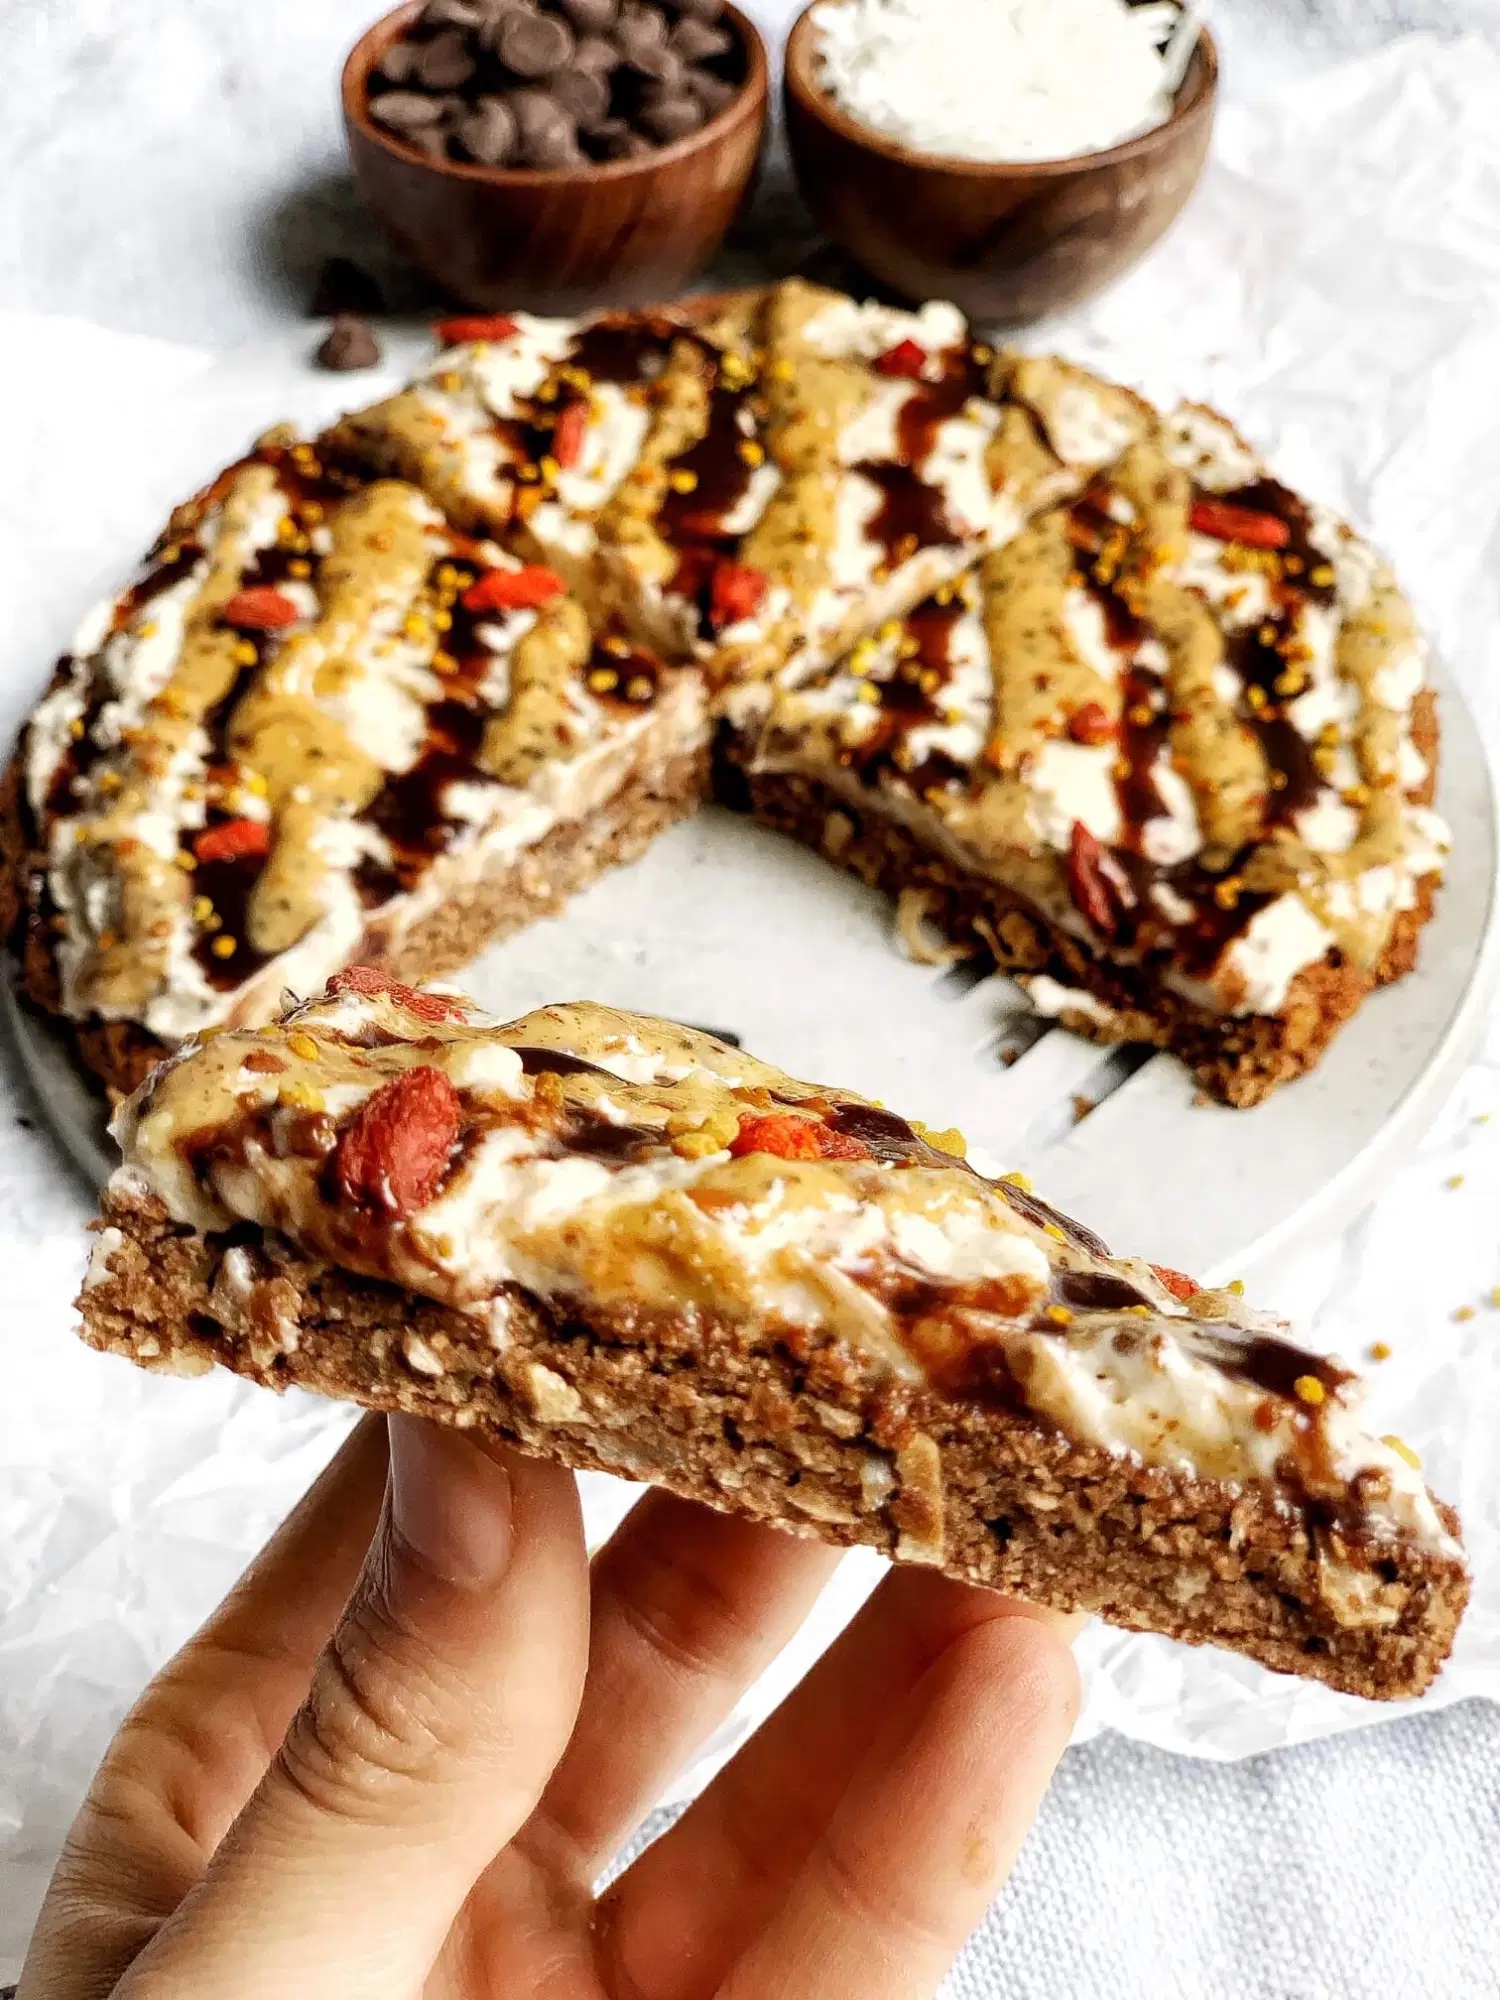 Dessert pizza recipes: Healthy dessert pizza at Donut Worry, Be Healthy